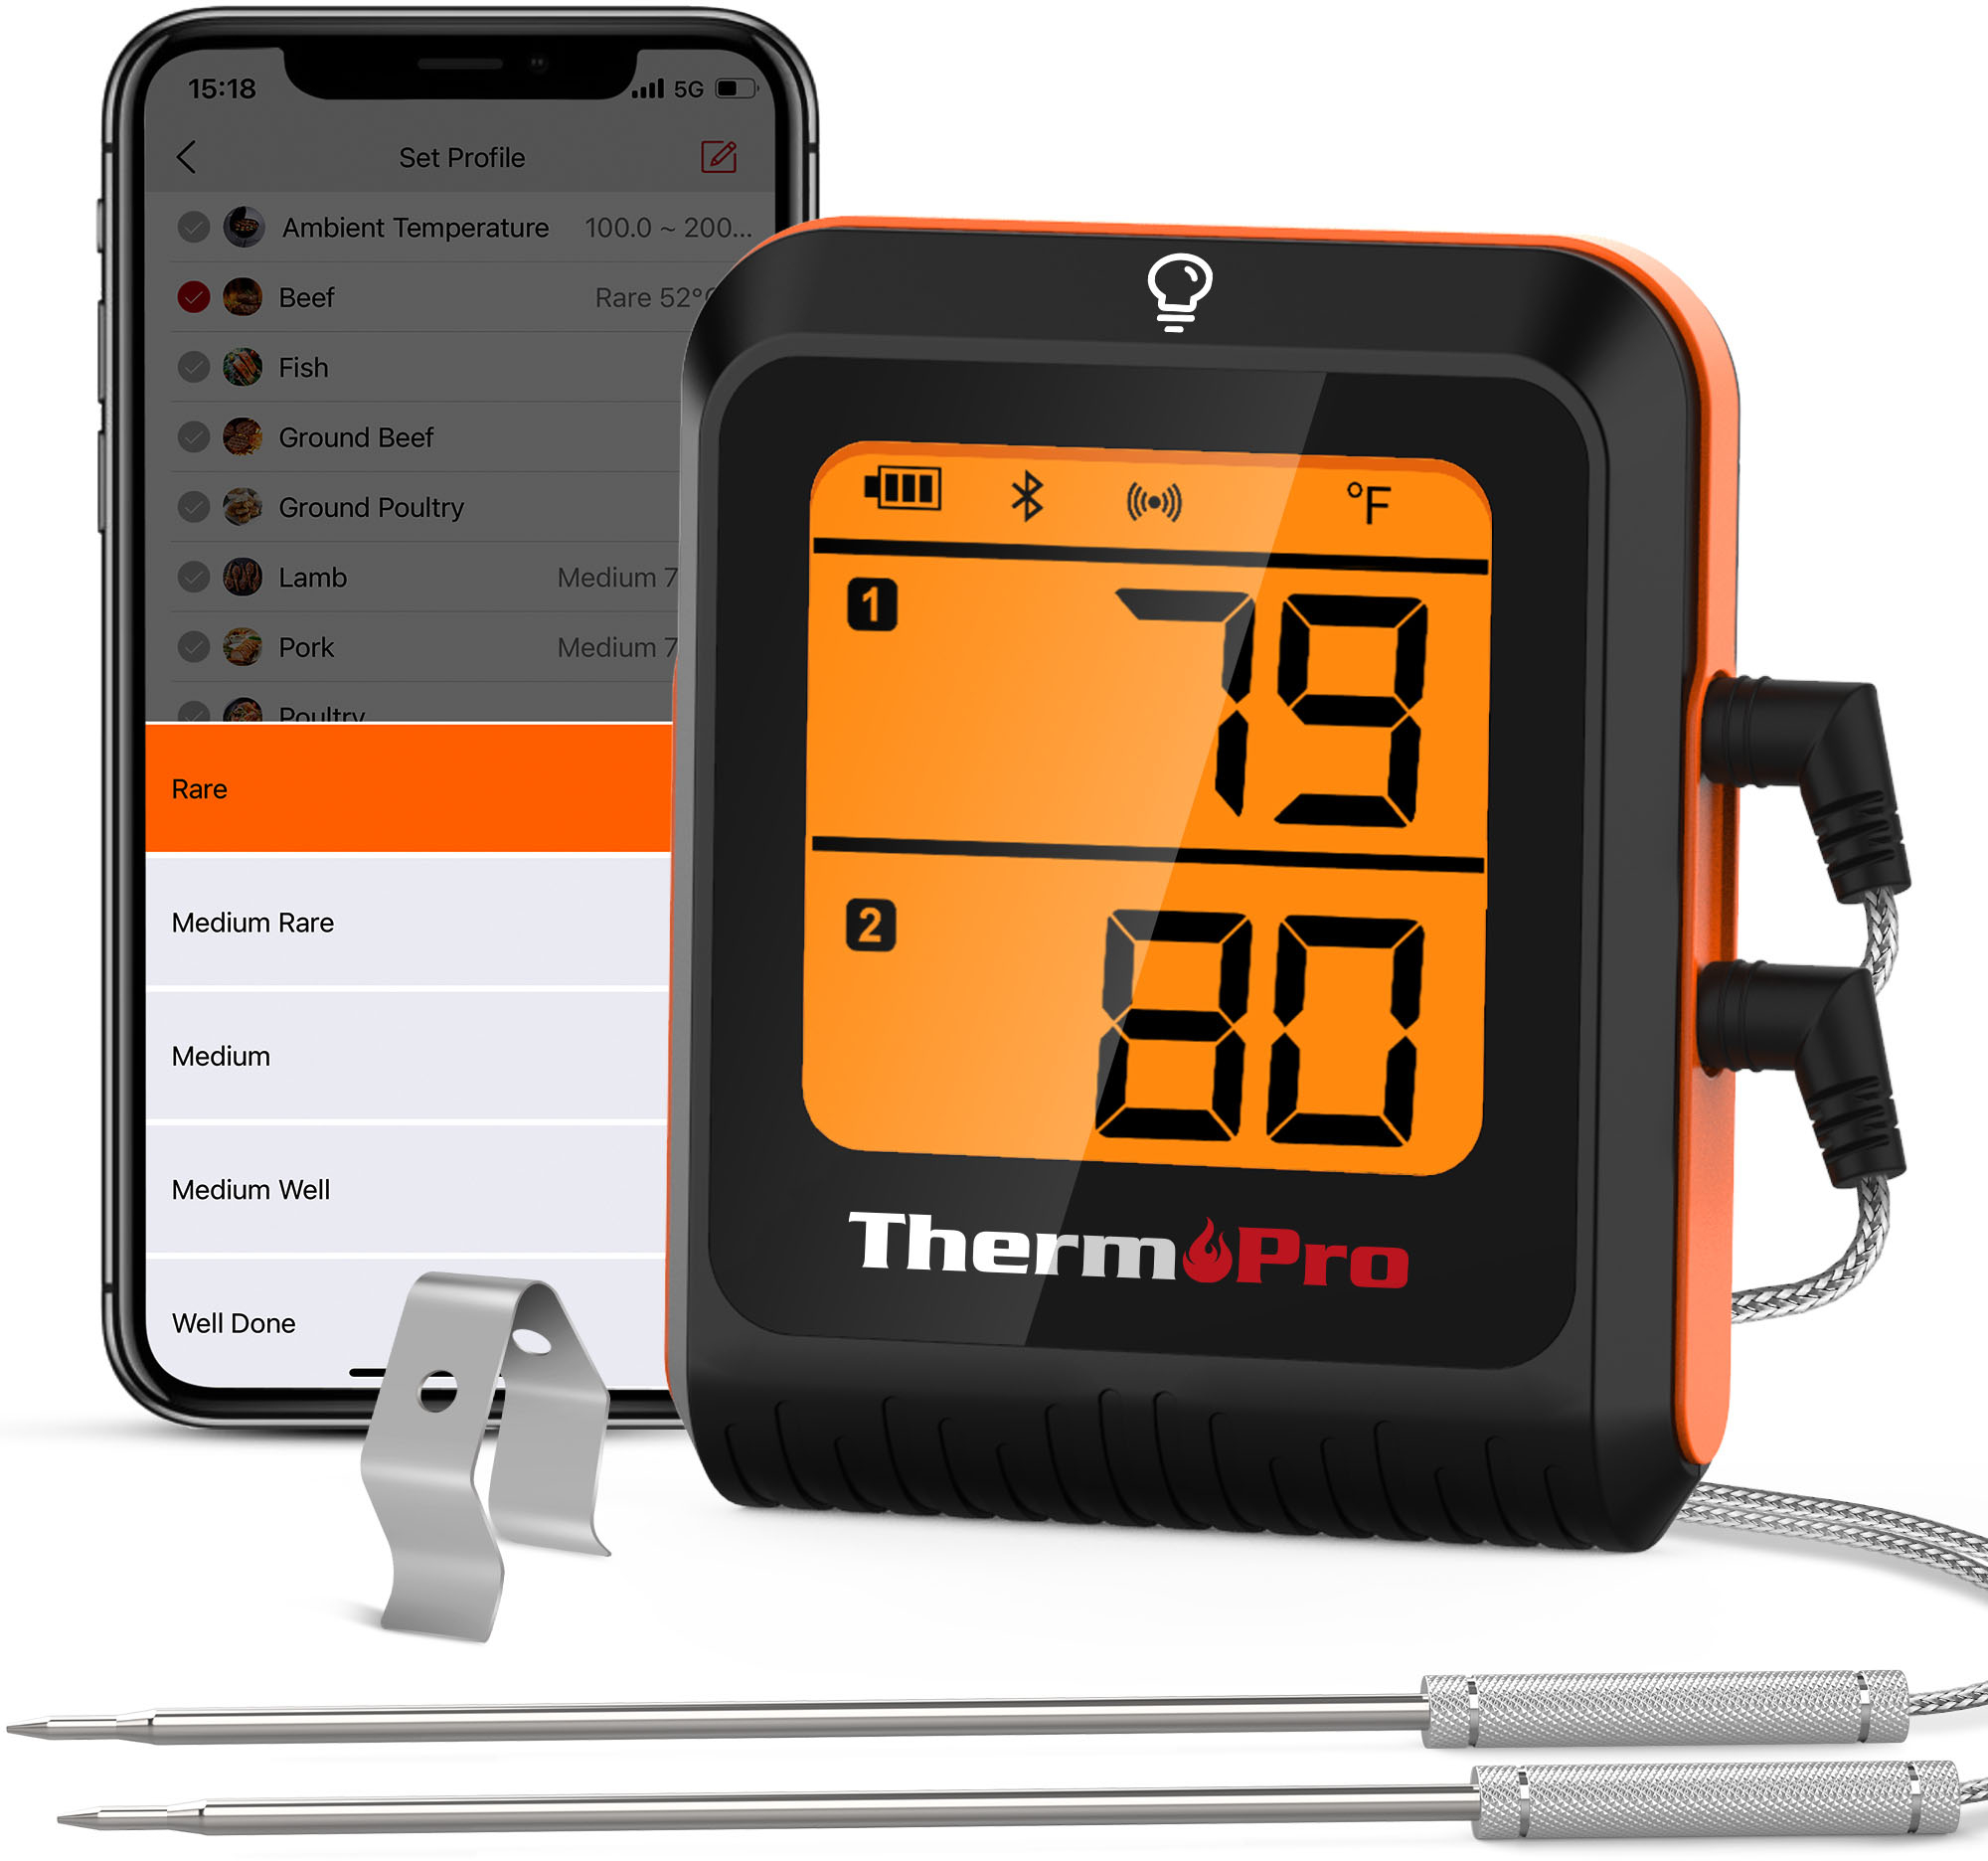 0810012962155 - THERMOPRO - BLUETOOTH DUAL PROBE DIGITAL MEAT THERMOMETER - BLACK